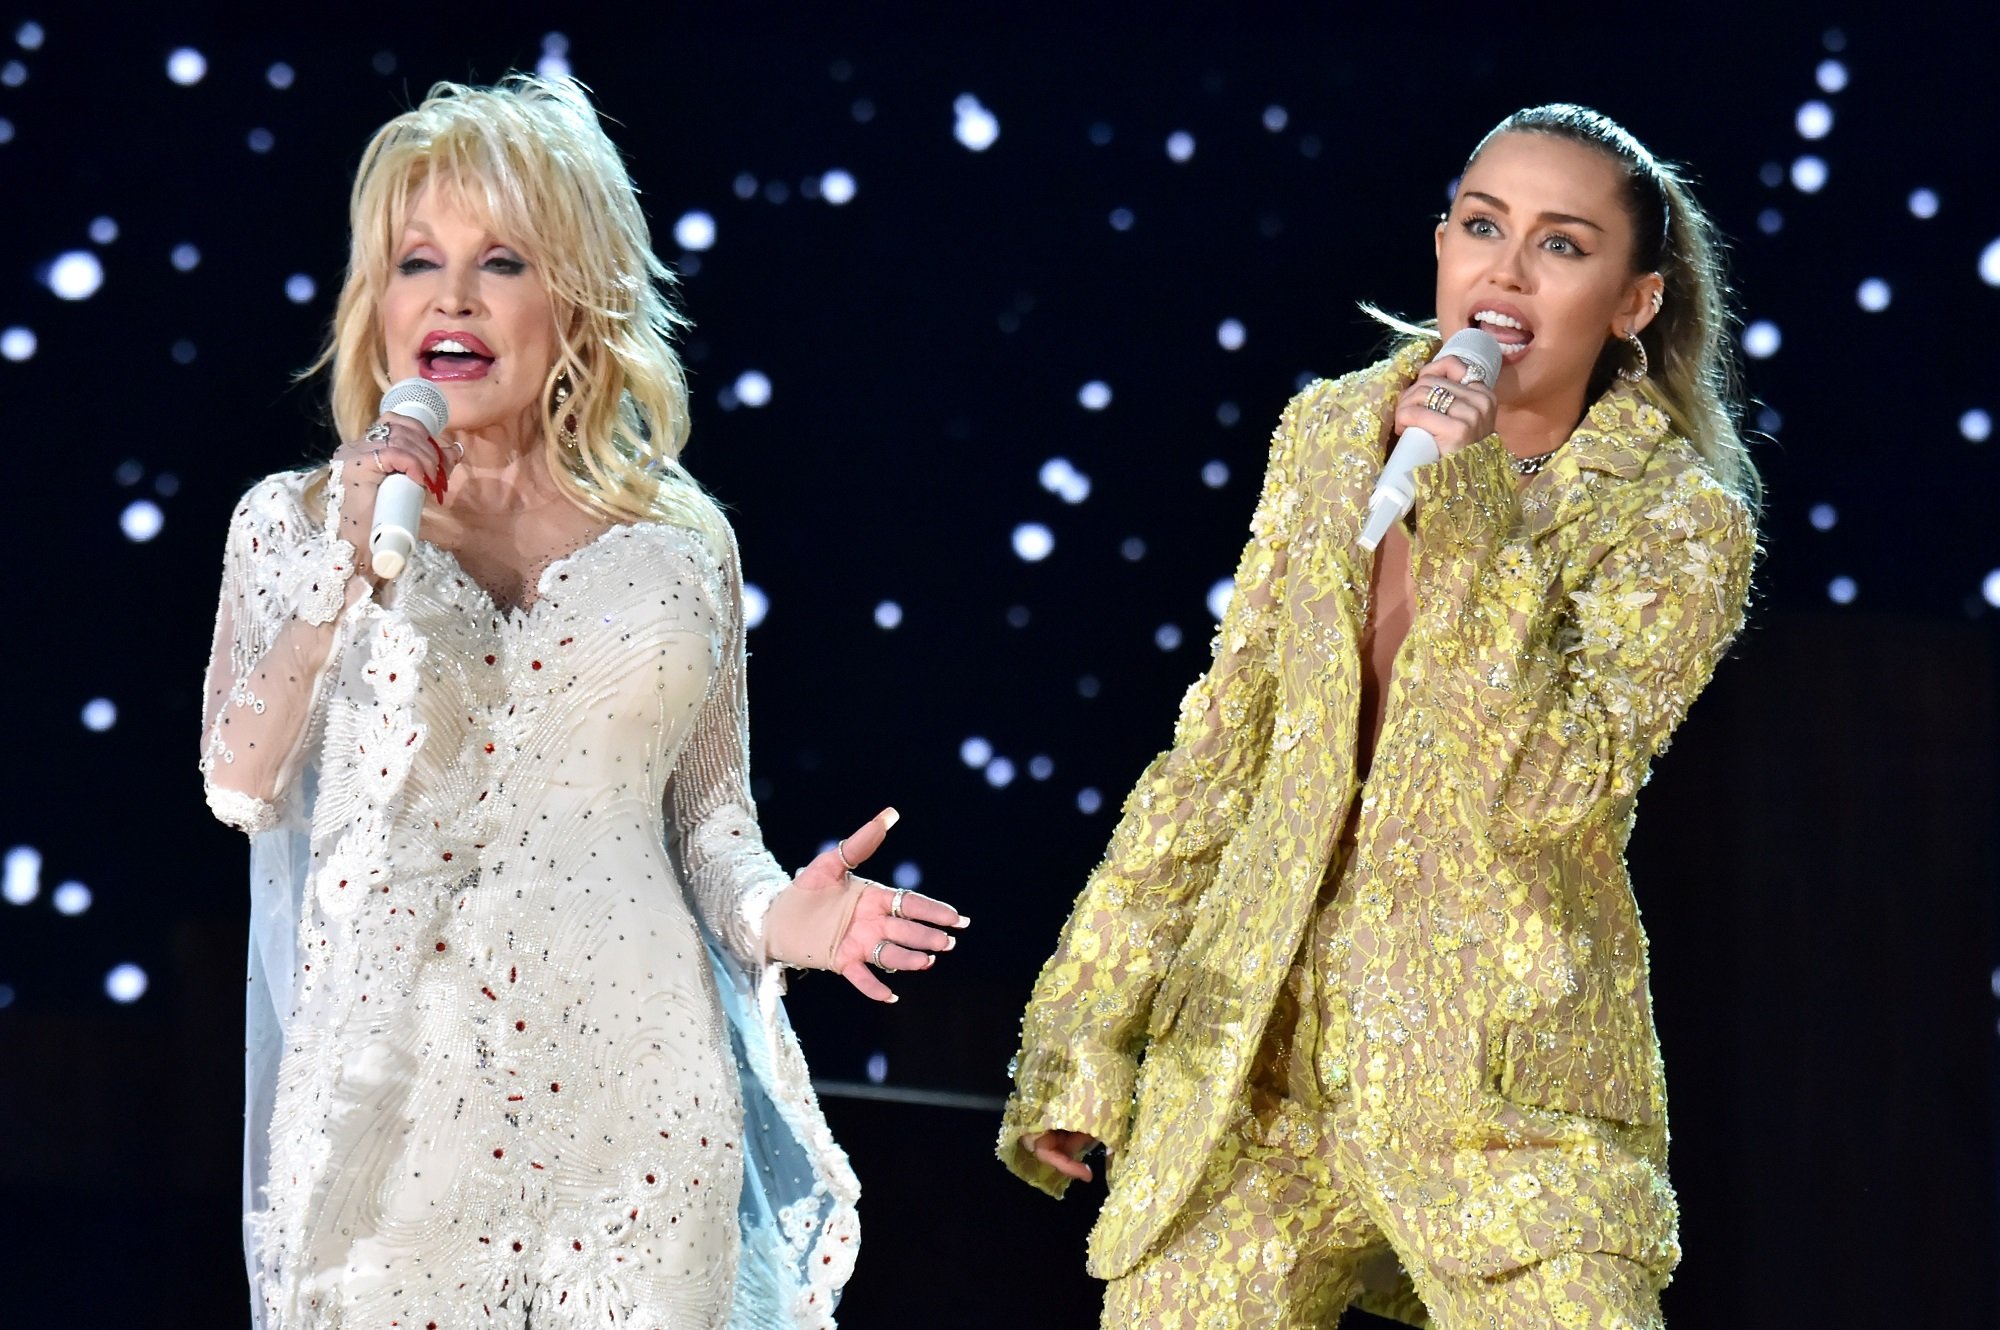 Dolly Parton (L) and Miley Cyrus perform onstage during the 61st Annual GRAMMY Awards on February 10, 2019